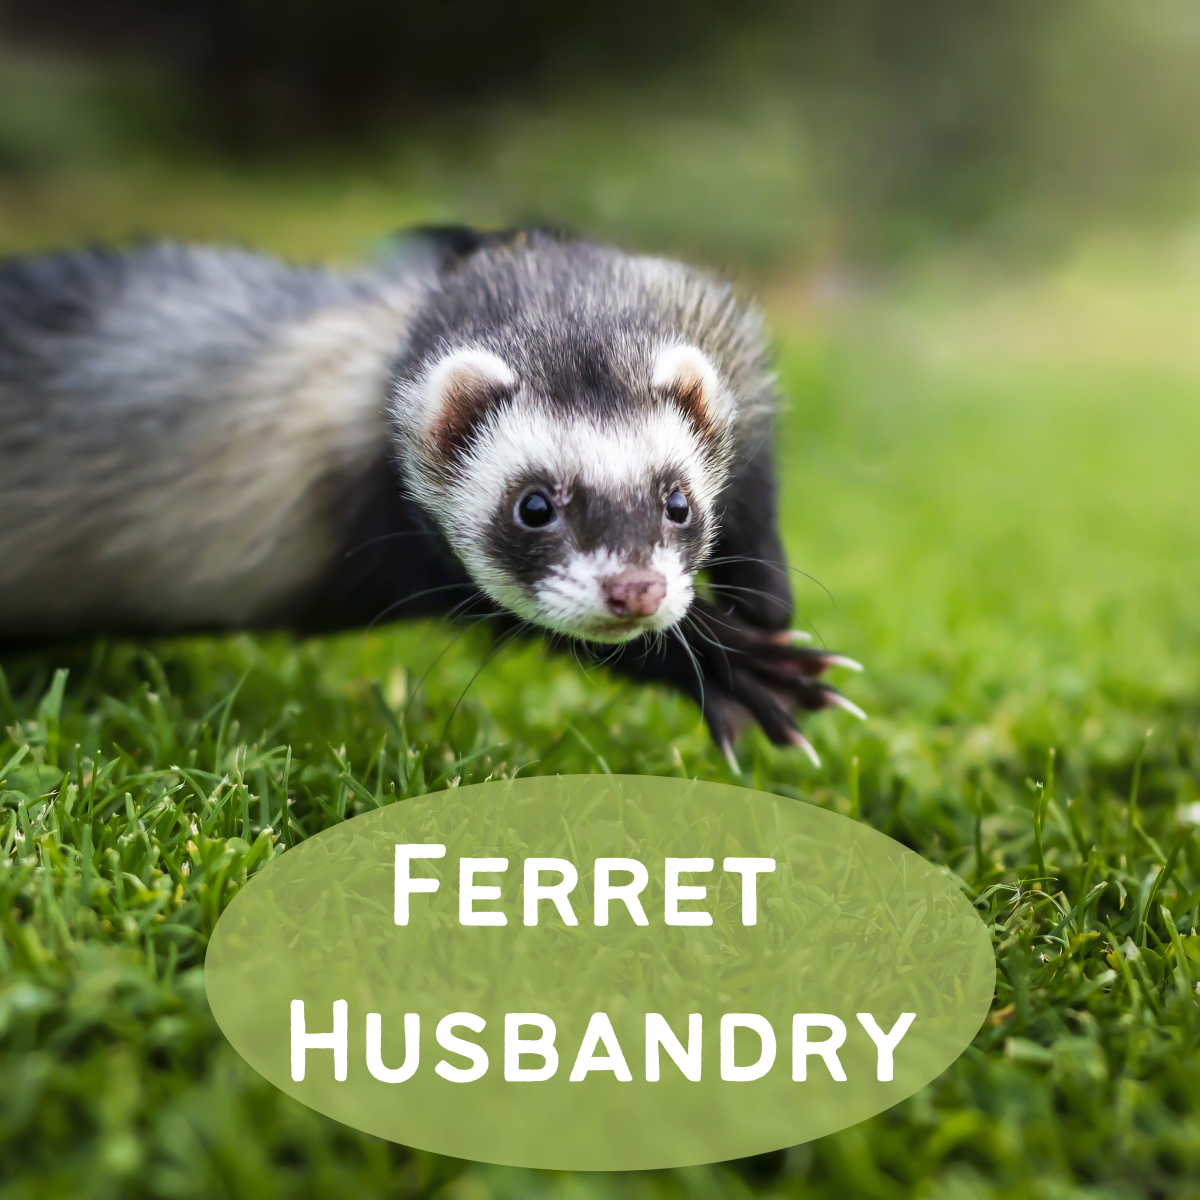 A guide to caring for ferrets 